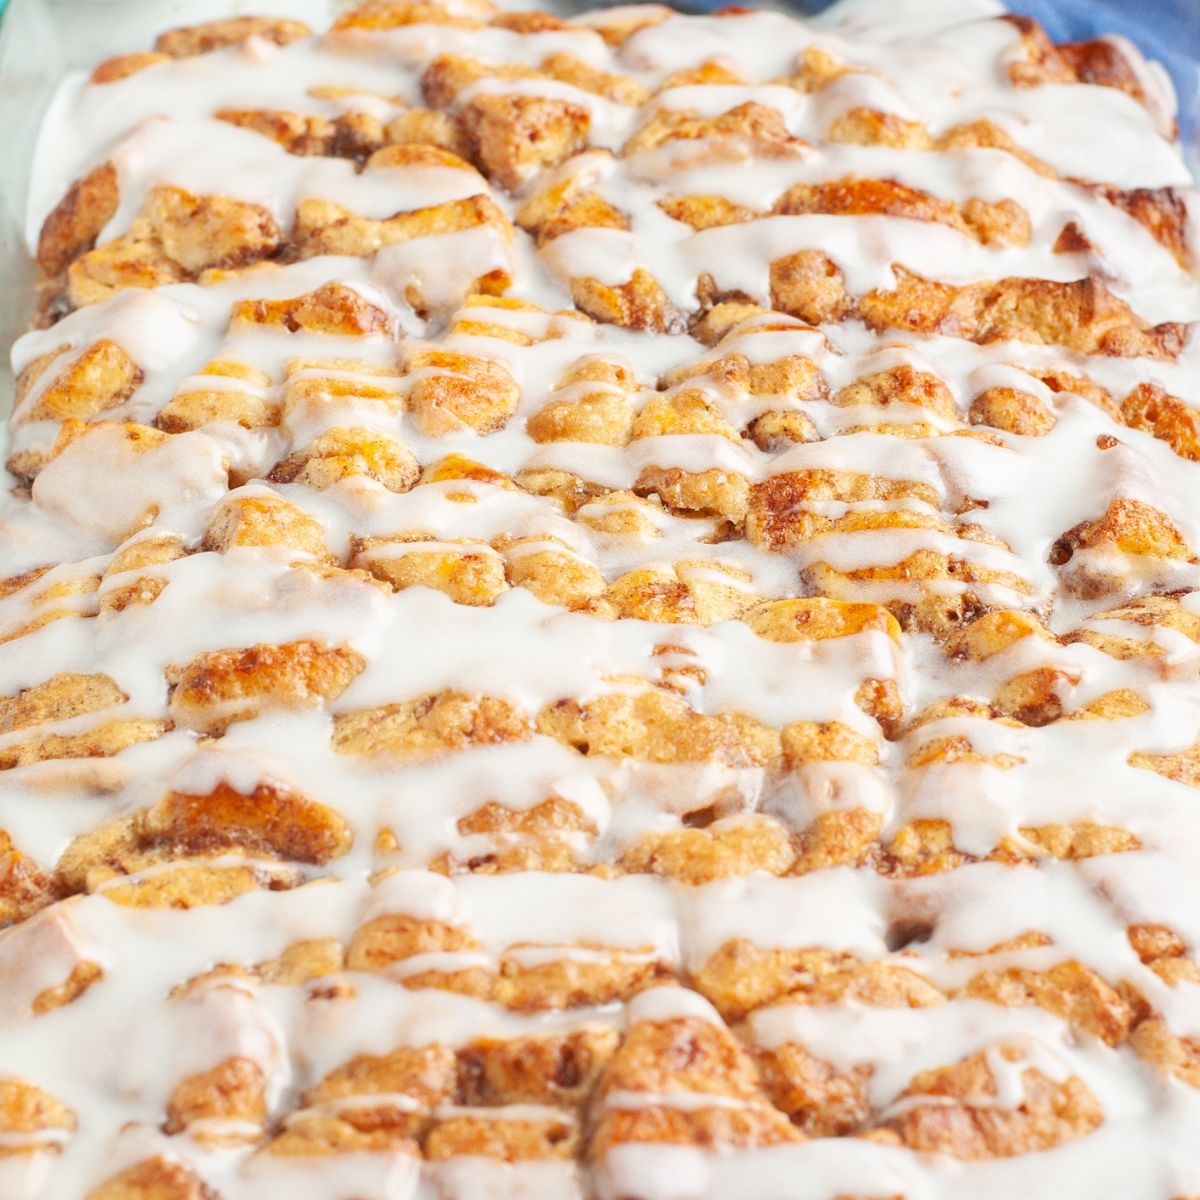 Cinnamon roll casserole with icing.